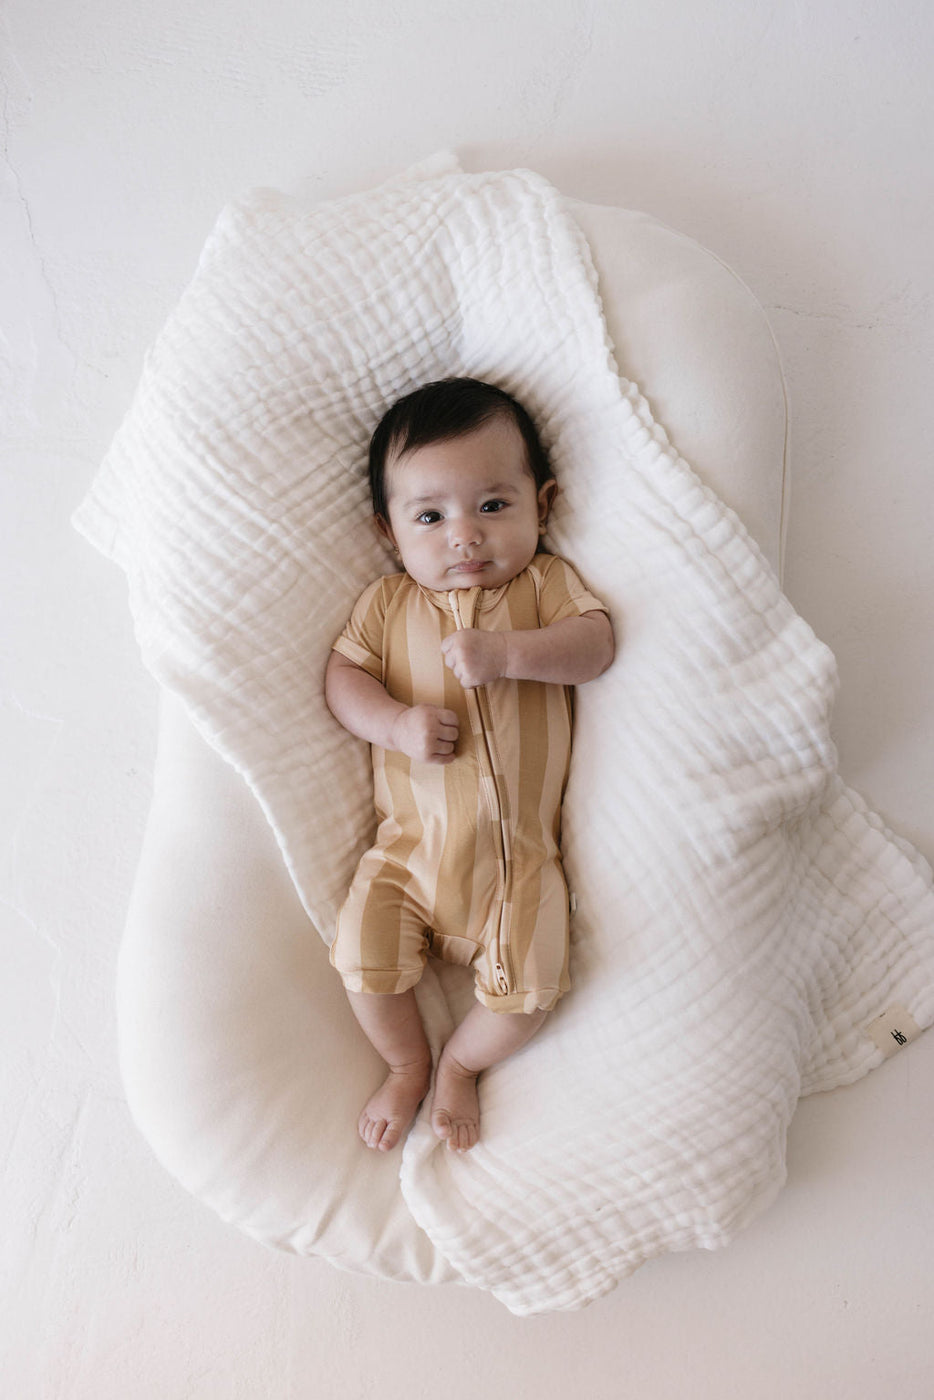 a baby lying in a white blanket